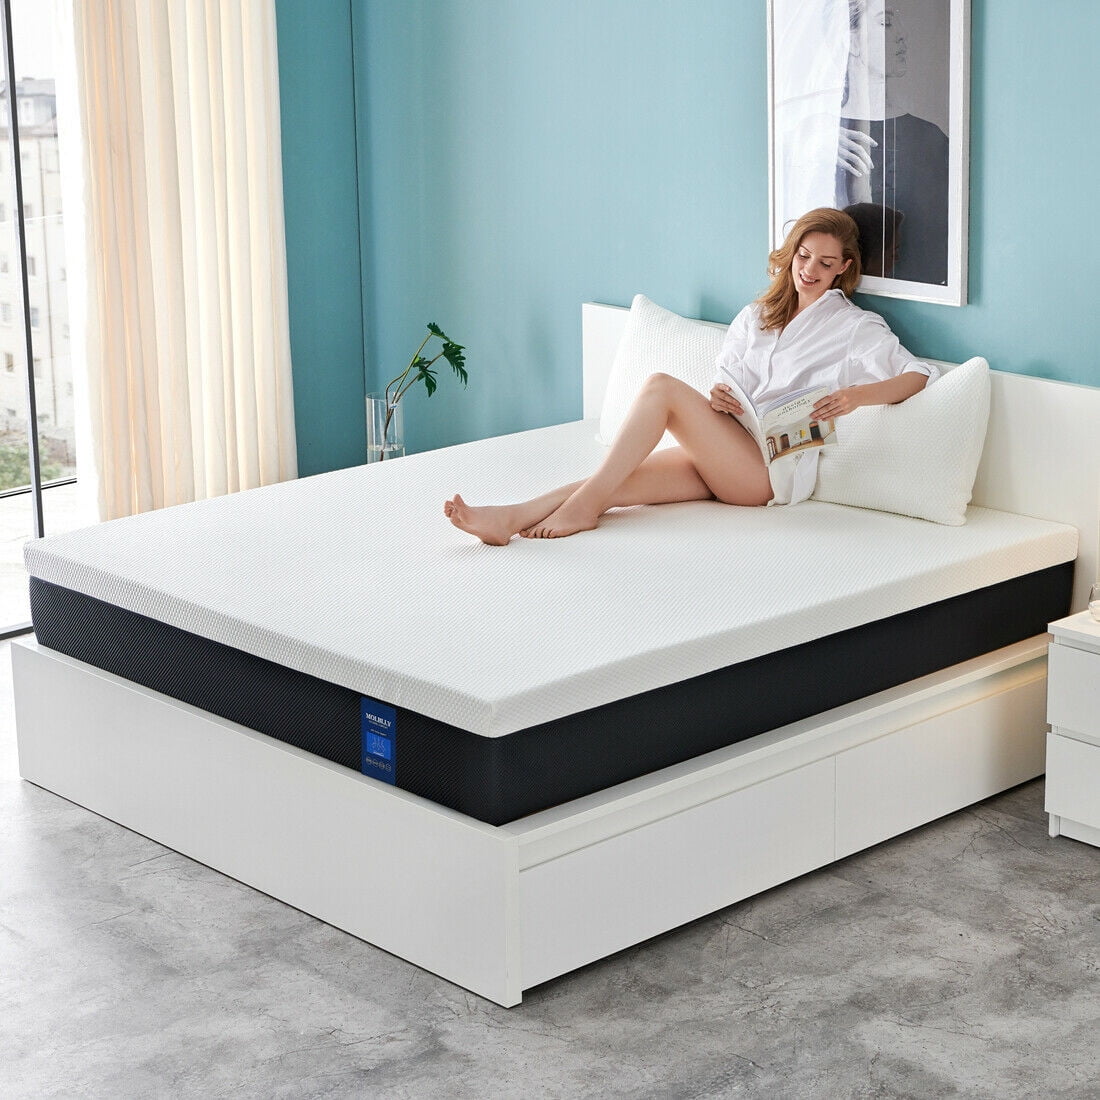 Details about   Queen Mattress Molblly 10 inch Gel Memory 